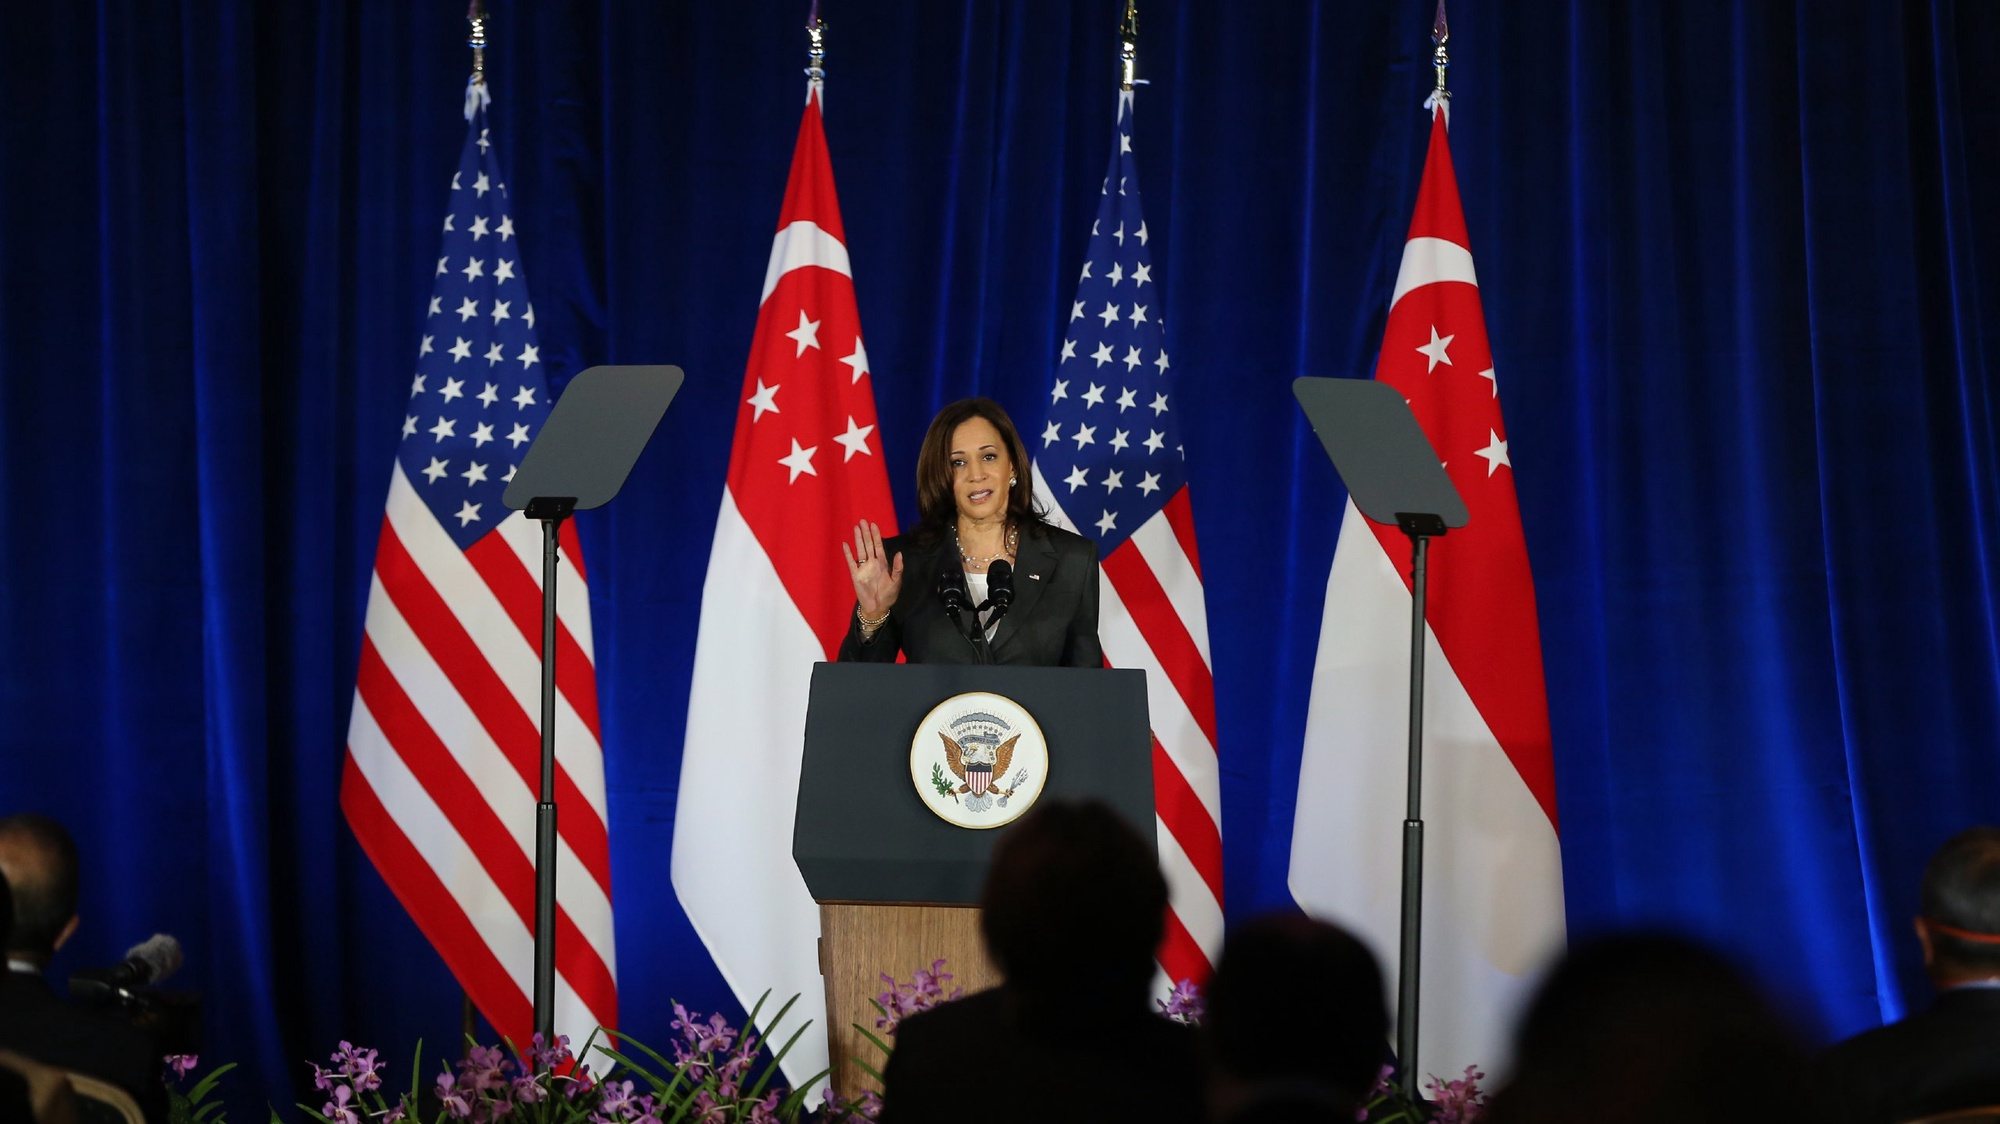 epa09427015 US Vice President Kamala Harris delivers a speech at Gardens by the Bay in Singapore, 24 August 2021. US Vice President Kamala Harris is on an official three-day visit to Singapore before heading to Vietnam on 24 August 2021.  EPA/ONG WEE JIN / SPH SINGAPORE OUT